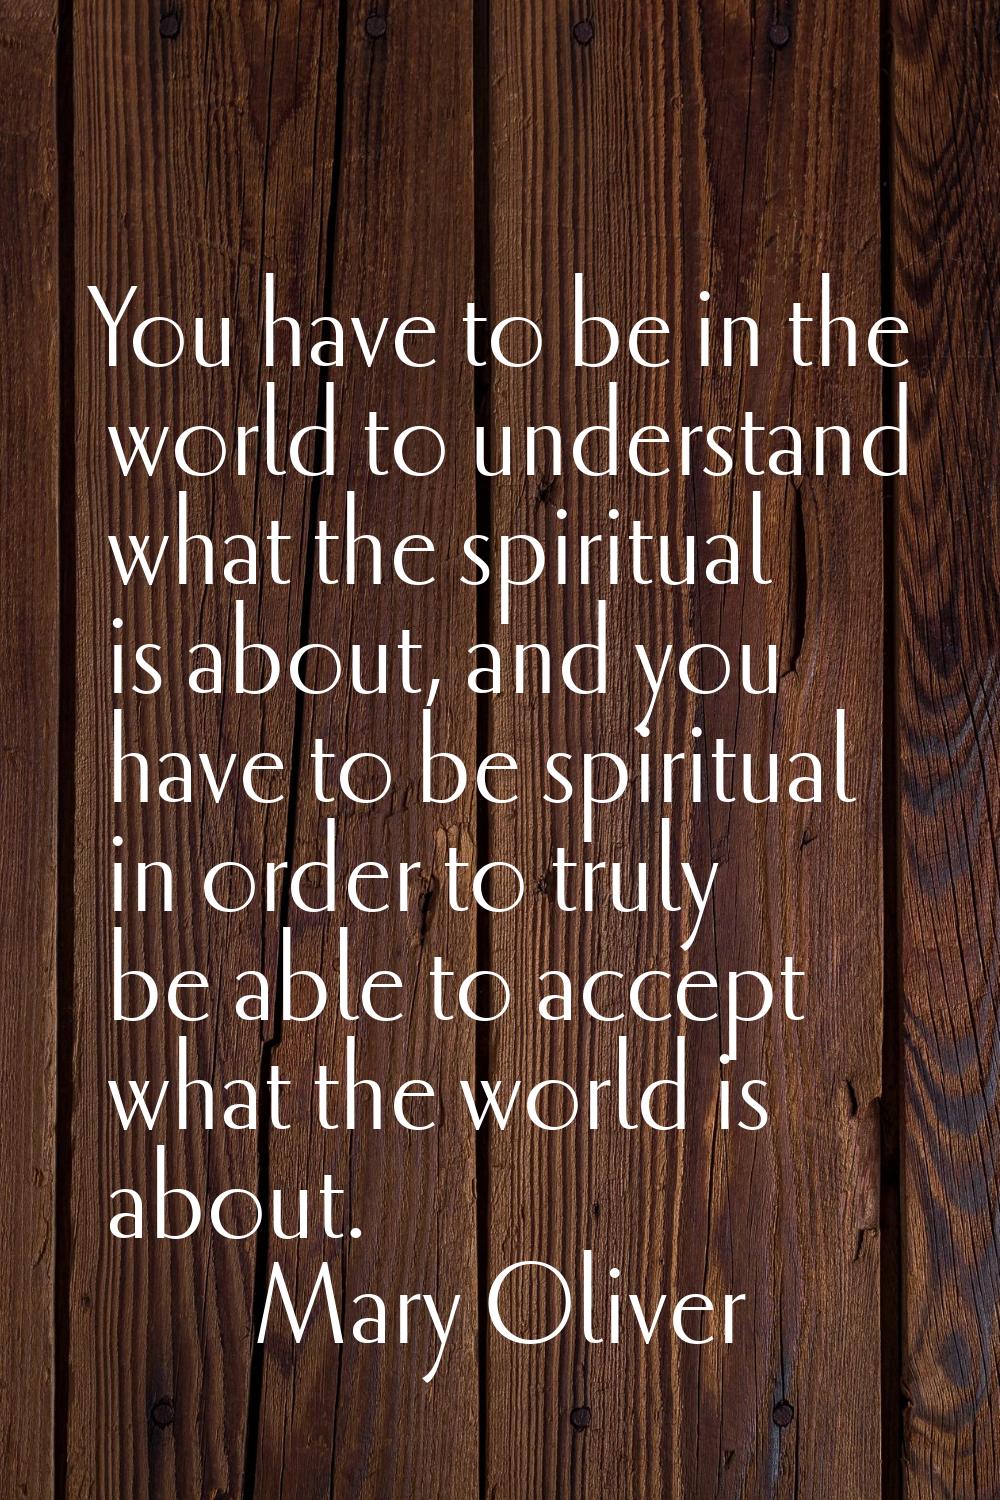 You have to be in the world to understand what the spiritual is about, and you have to be spiritual